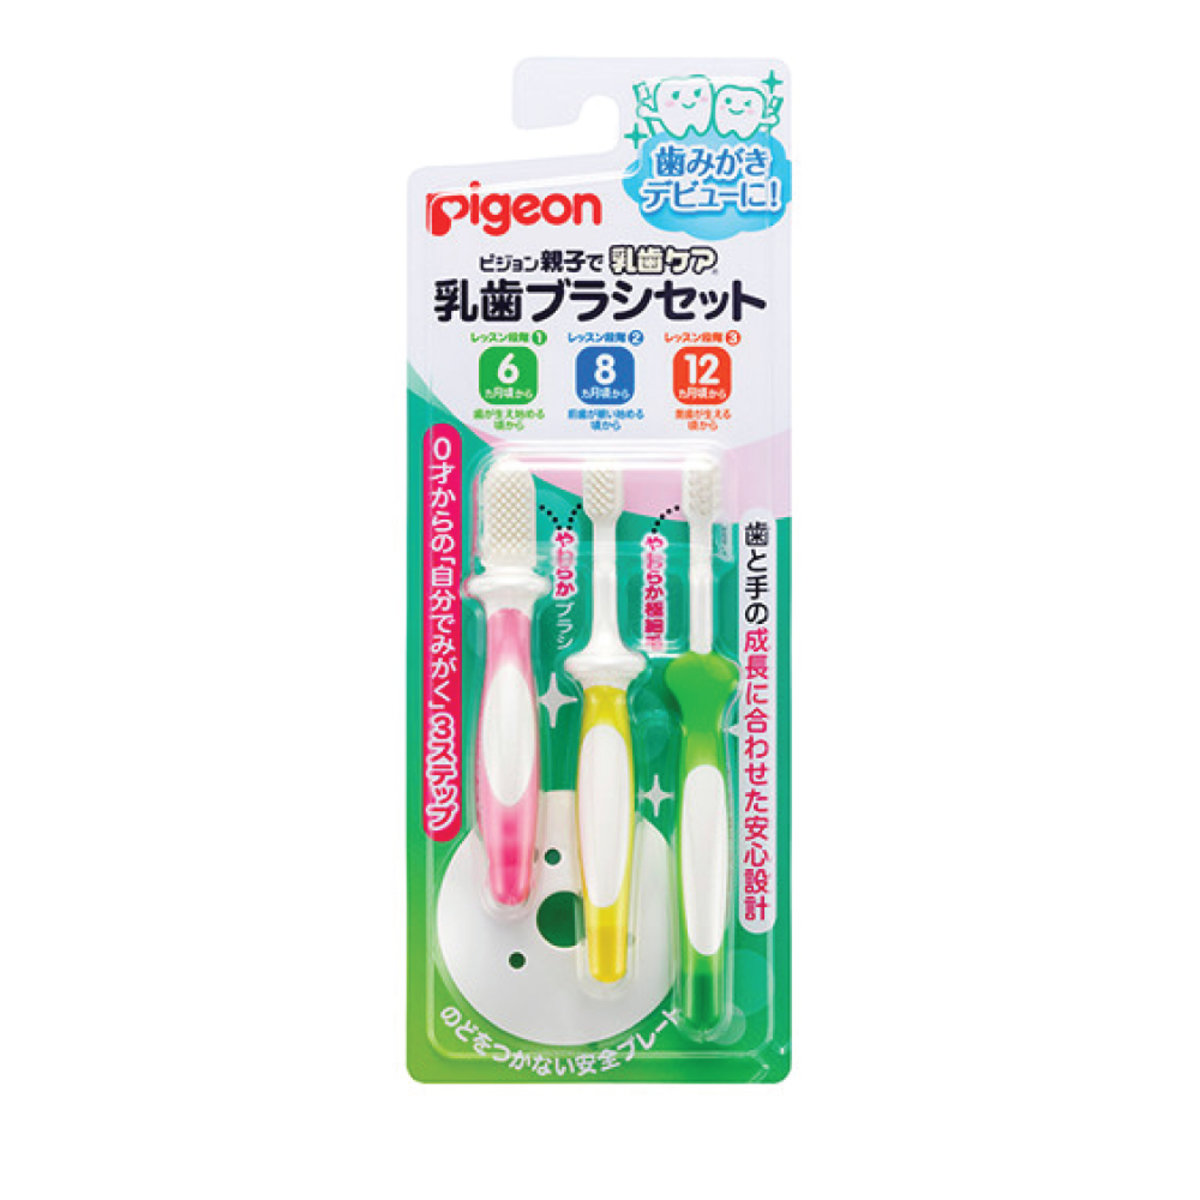 safety toothbrush